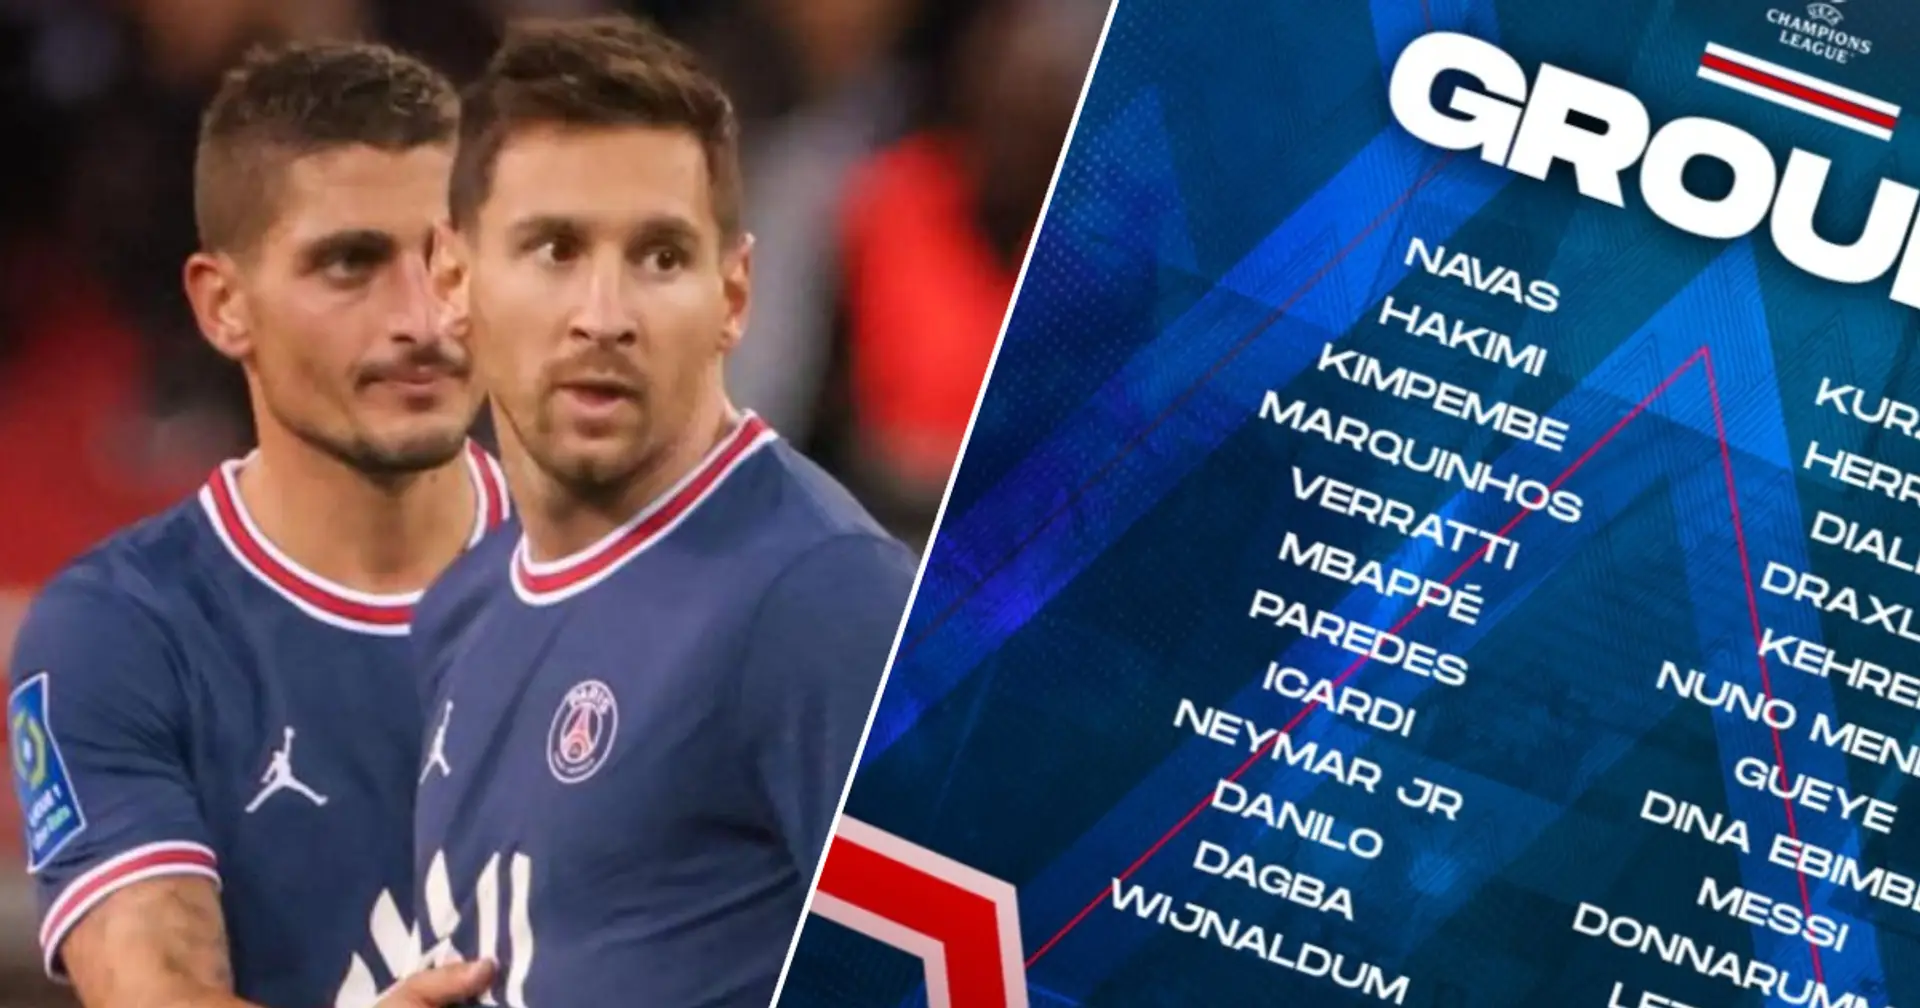 Messi and Verratti back in: PSG reveal 23-man squad for Manchester City clash